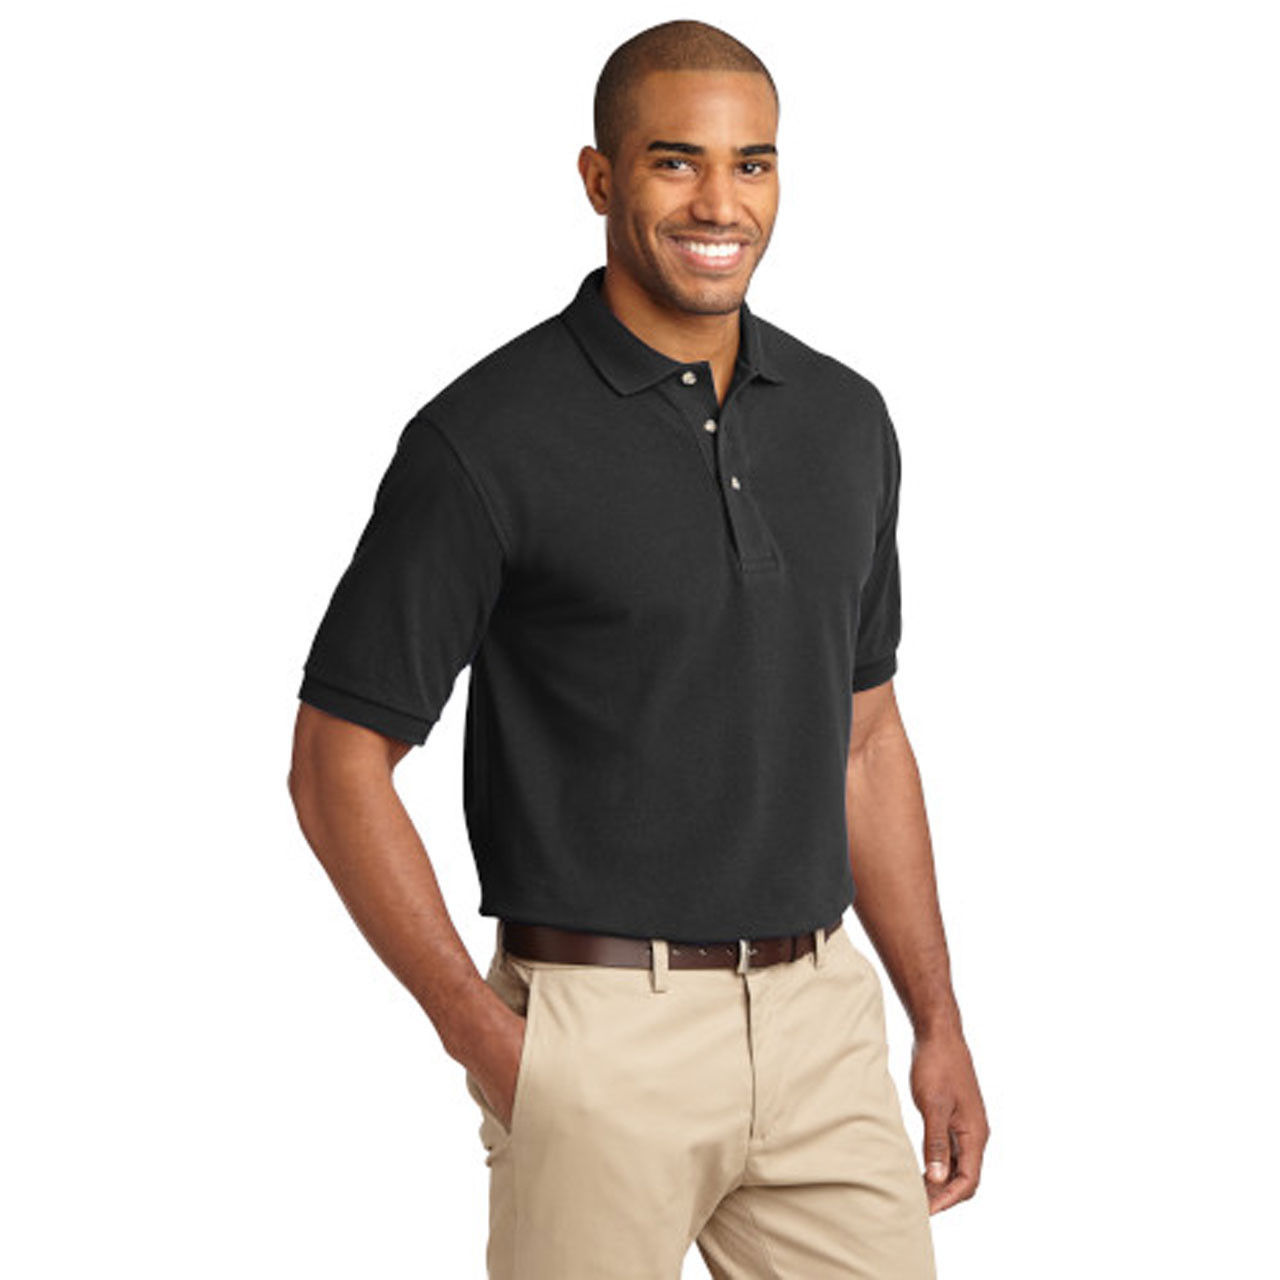 Could you detail the features of these 100 cotton polo shirts wholesale, please?